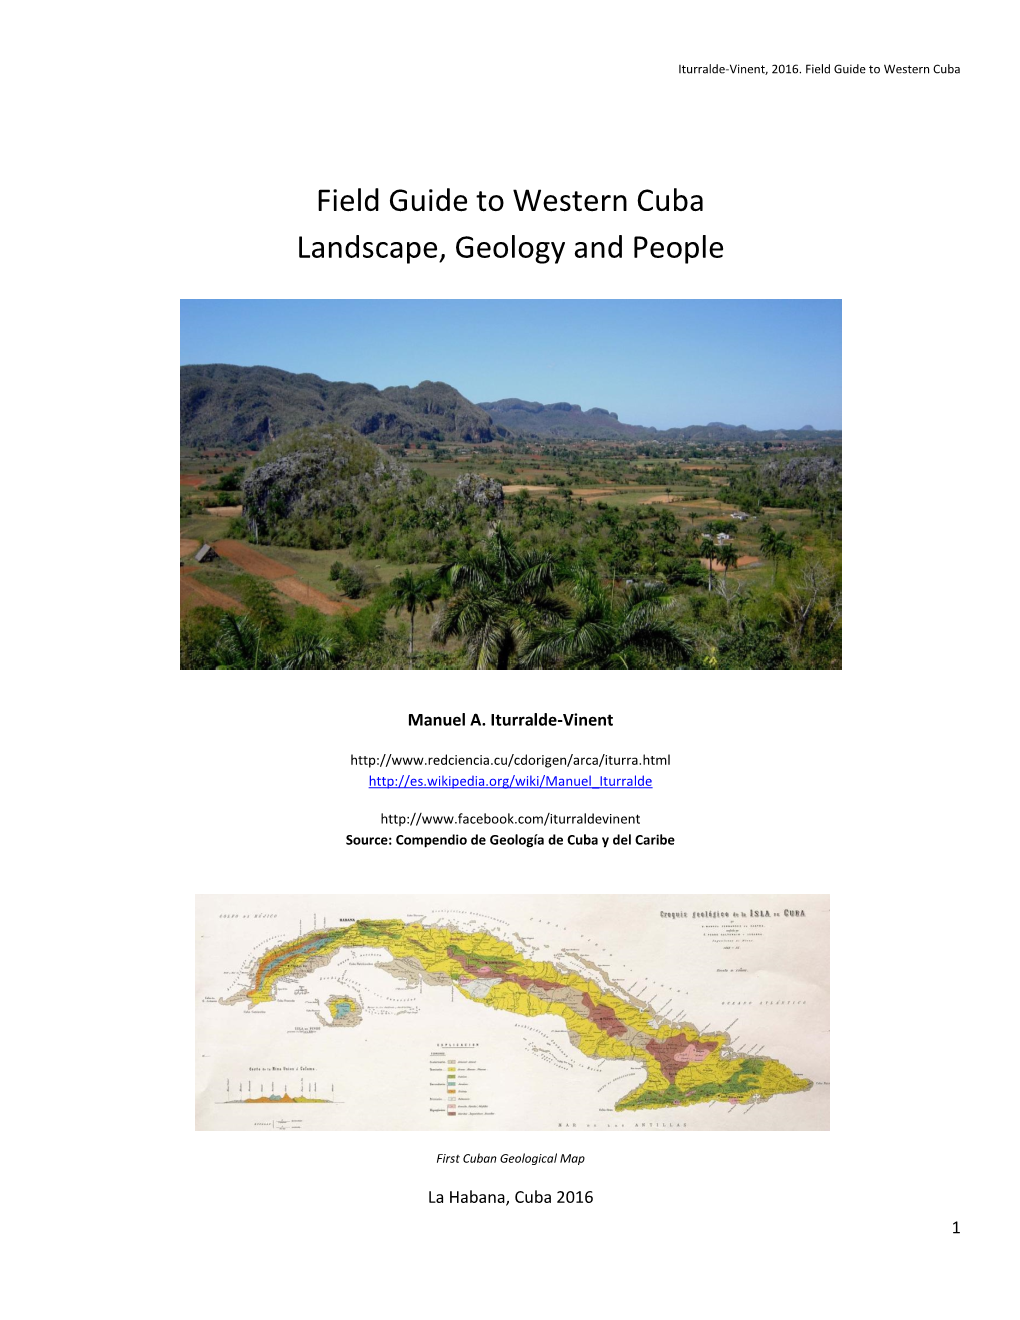 Field Guide to Western Cuba Landscape, Geology and People